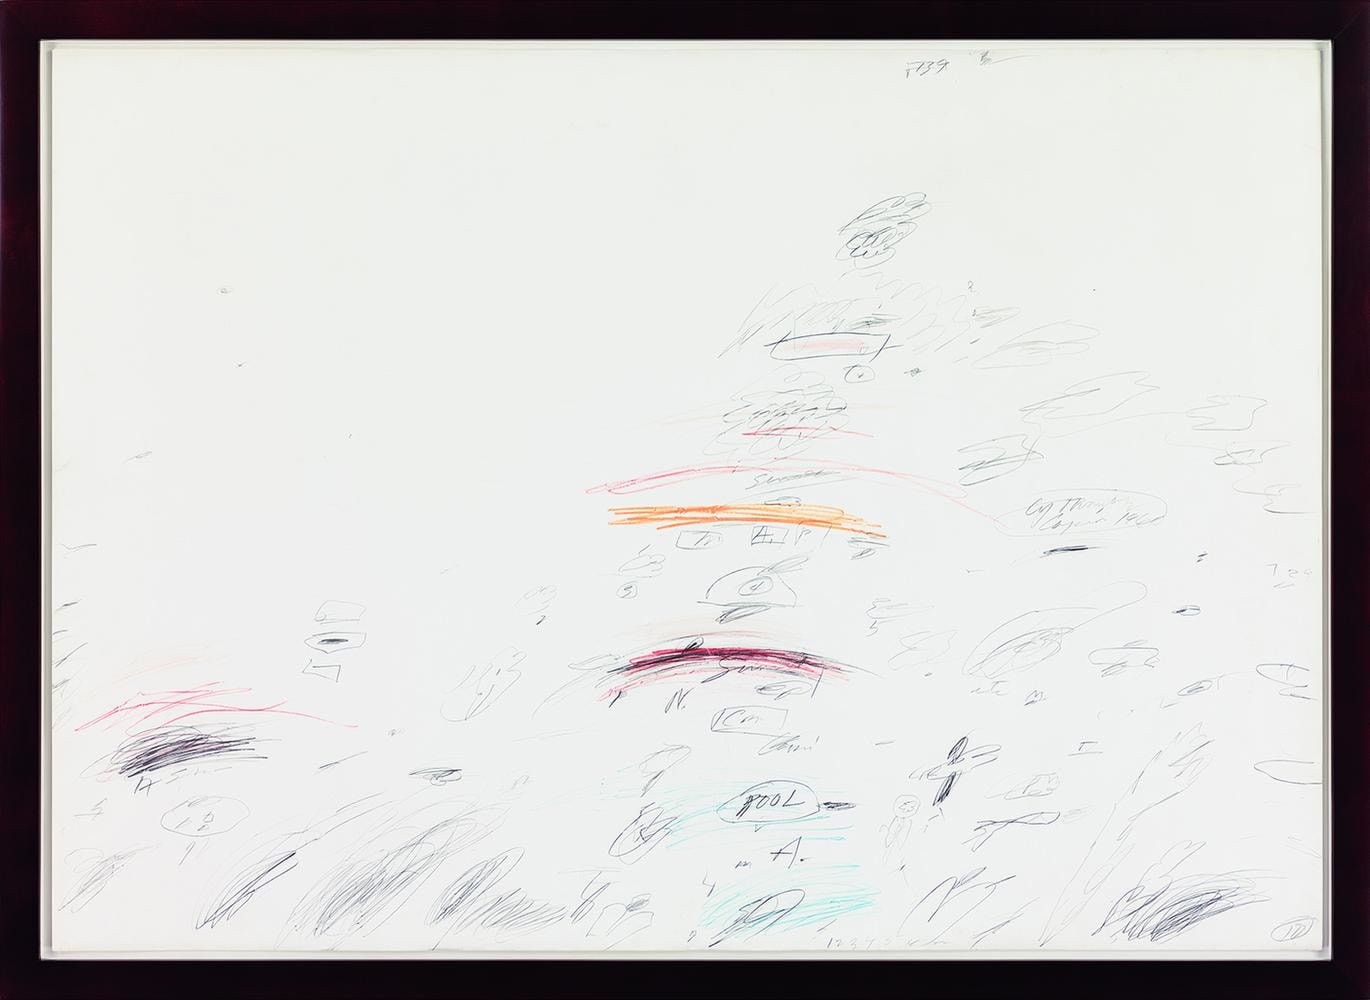 Cy Twombly Capri 1960 wax crayon, graphite and pen on paper 29 x 40 inches (73.7 x 101.6 cm)